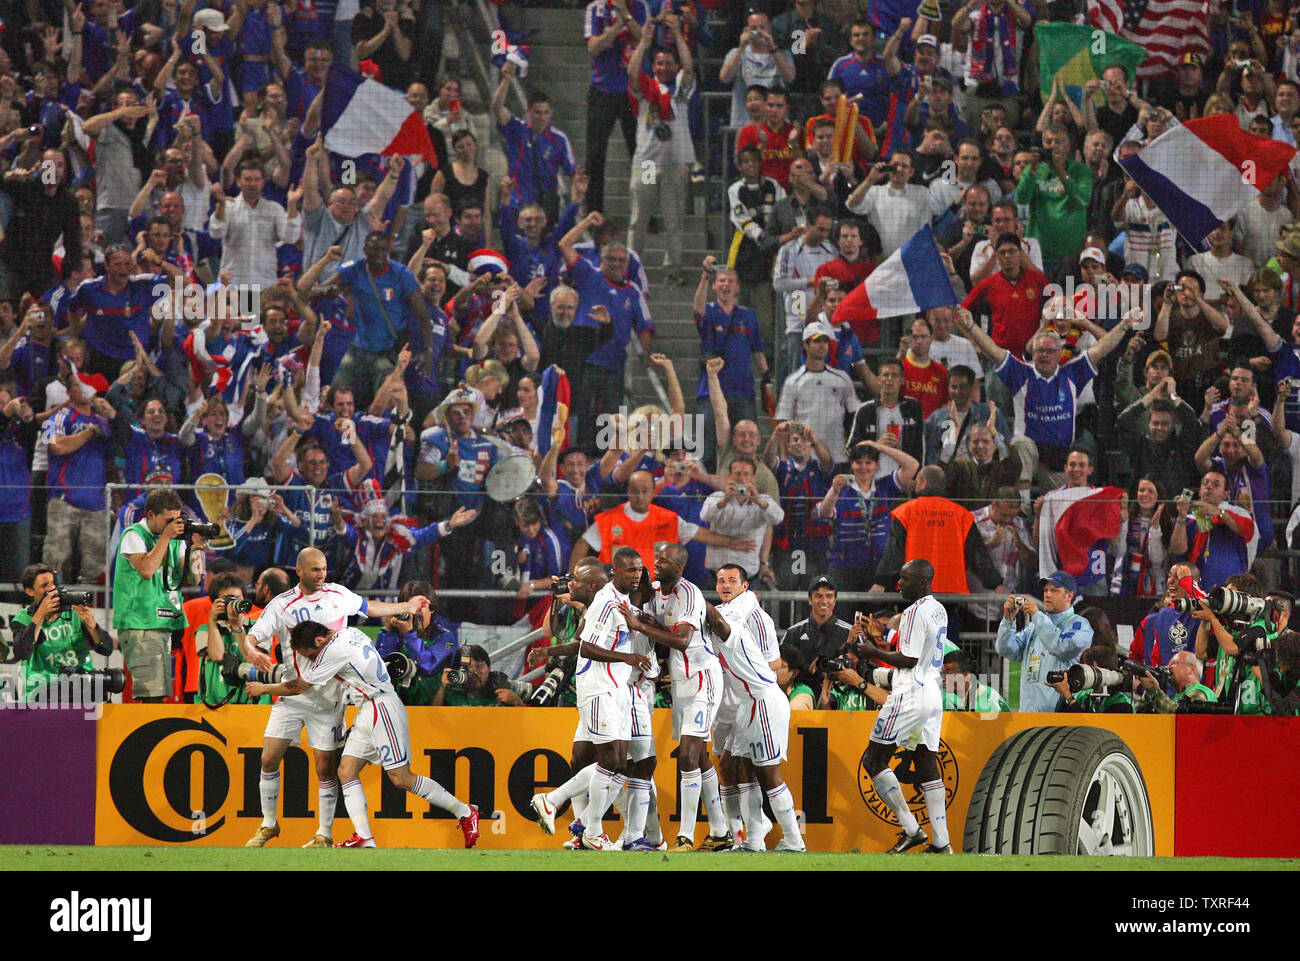 France's Zinedine Zidane celebrates with his team-mates after scoring the third goal  during World Cup soccer action in Hanover, Germany on June 27, 2006. France defeated Spain 3-1. (UPI Photo/Christian Brunskill) Stock Photo